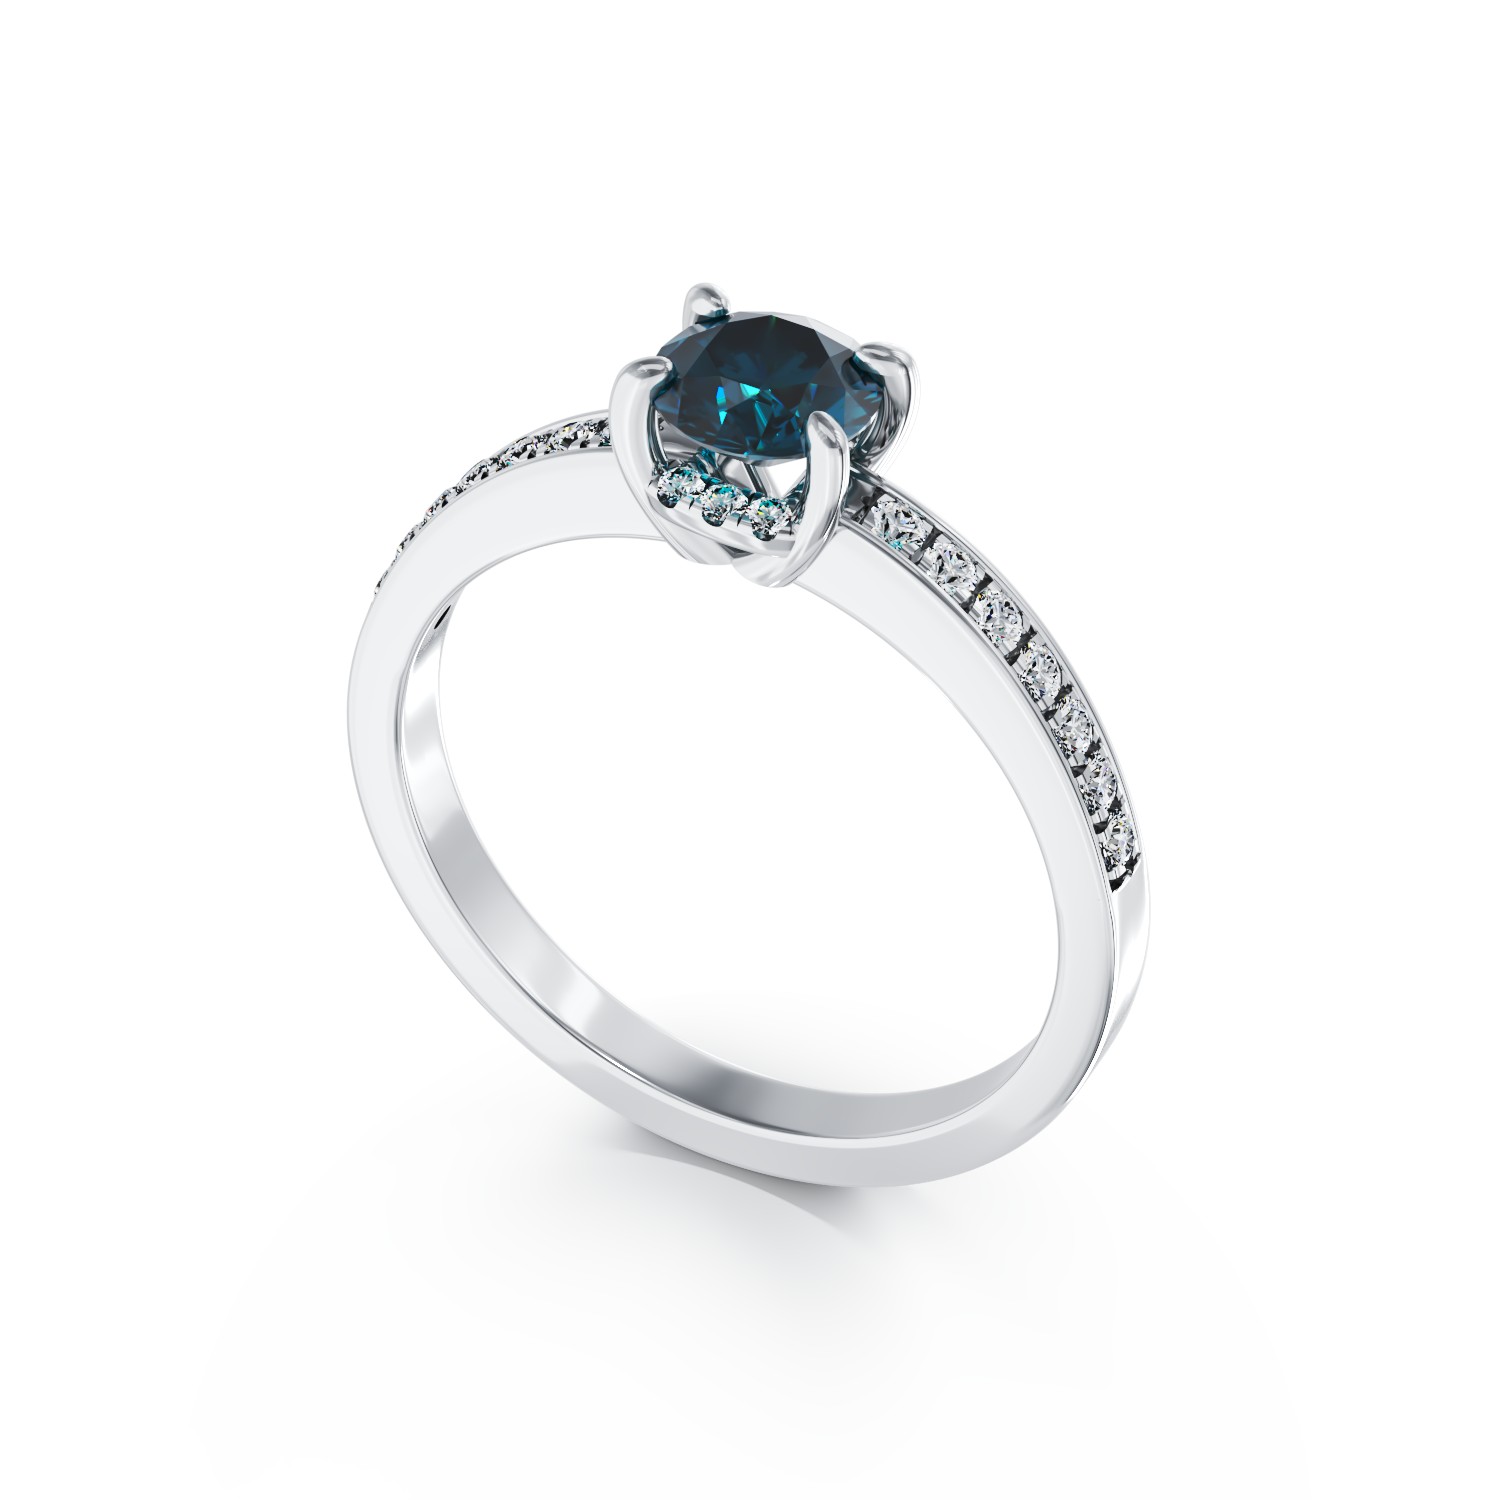 18K white gold engagement ring with blue diamond of 0.55ct and diamonds of 0.27ct